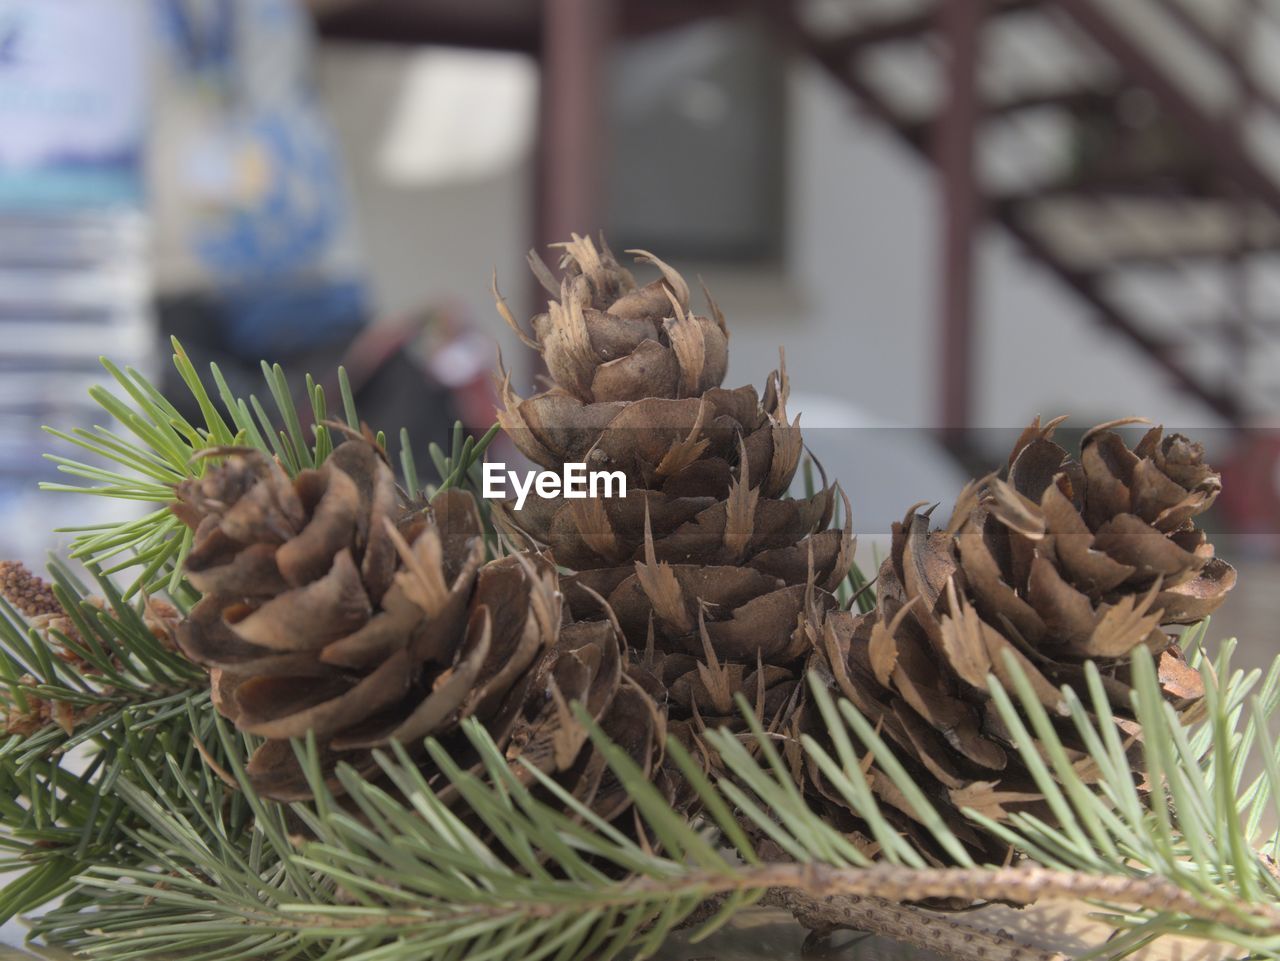 conifer cone, tree, pine cone, plant, food and drink, food, coniferous tree, pinaceae, spruce, christmas decoration, nature, fir, pine tree, focus on foreground, branch, no people, christmas tree, close-up, day, freshness, outdoors, healthy eating, growth, retail, business finance and industry, market